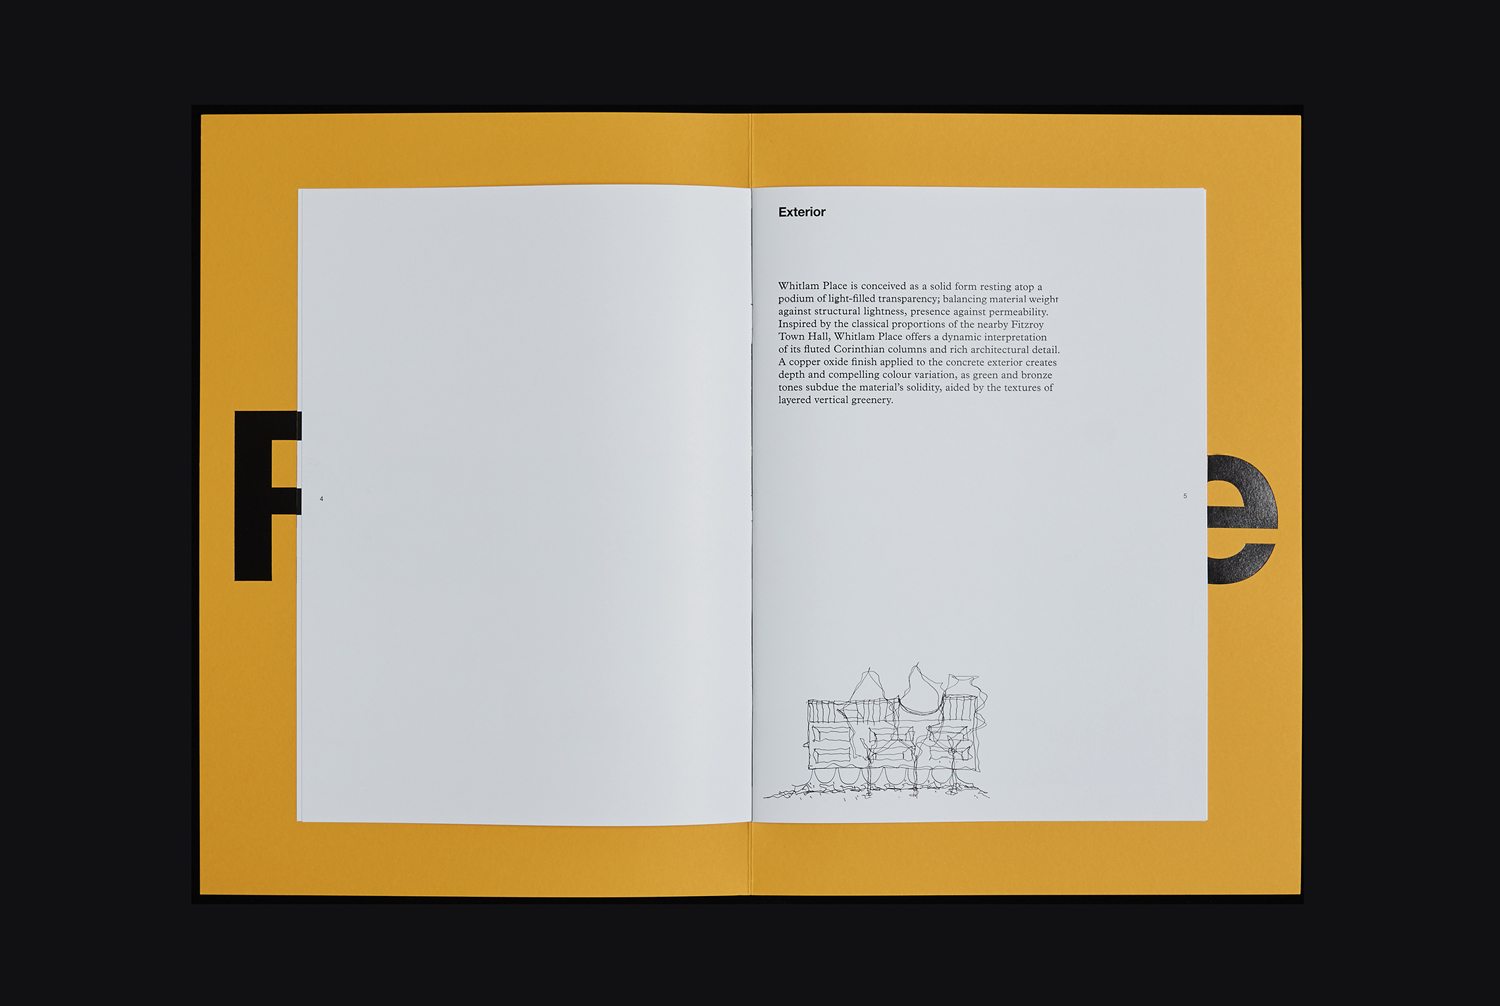 Response, a brochure designed by Studio Hi Ho for Fitzroy development Whitlam Place